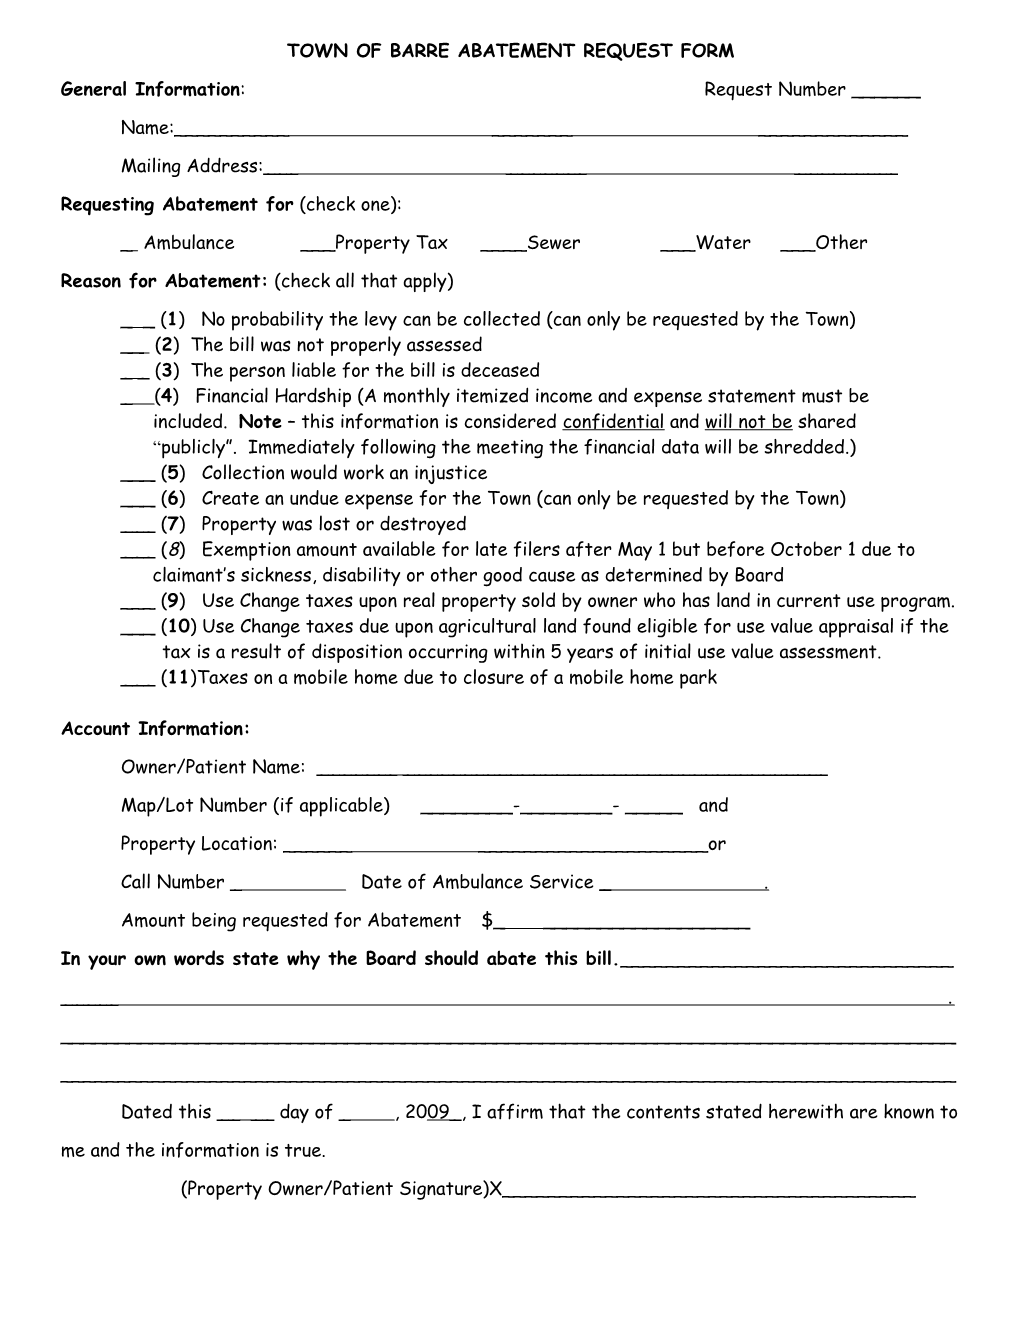 Town of Barre Abatement Request Form